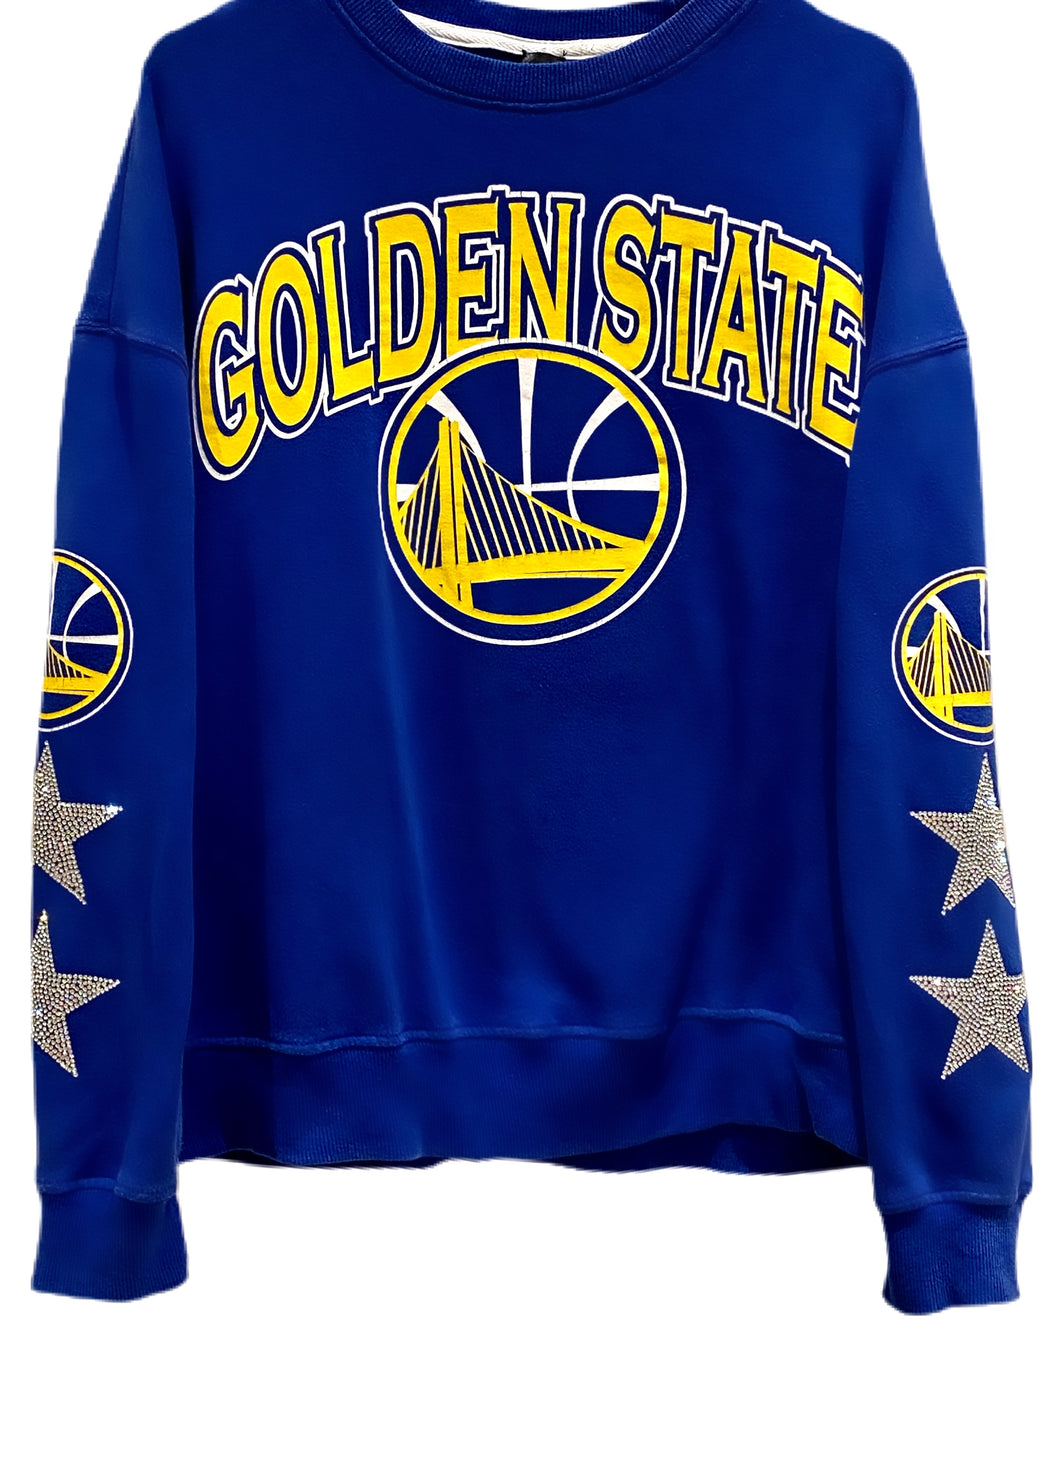 Golden State Warriors, NBA One of a KIND Vintage Sweatshirt with Crystal Star Design